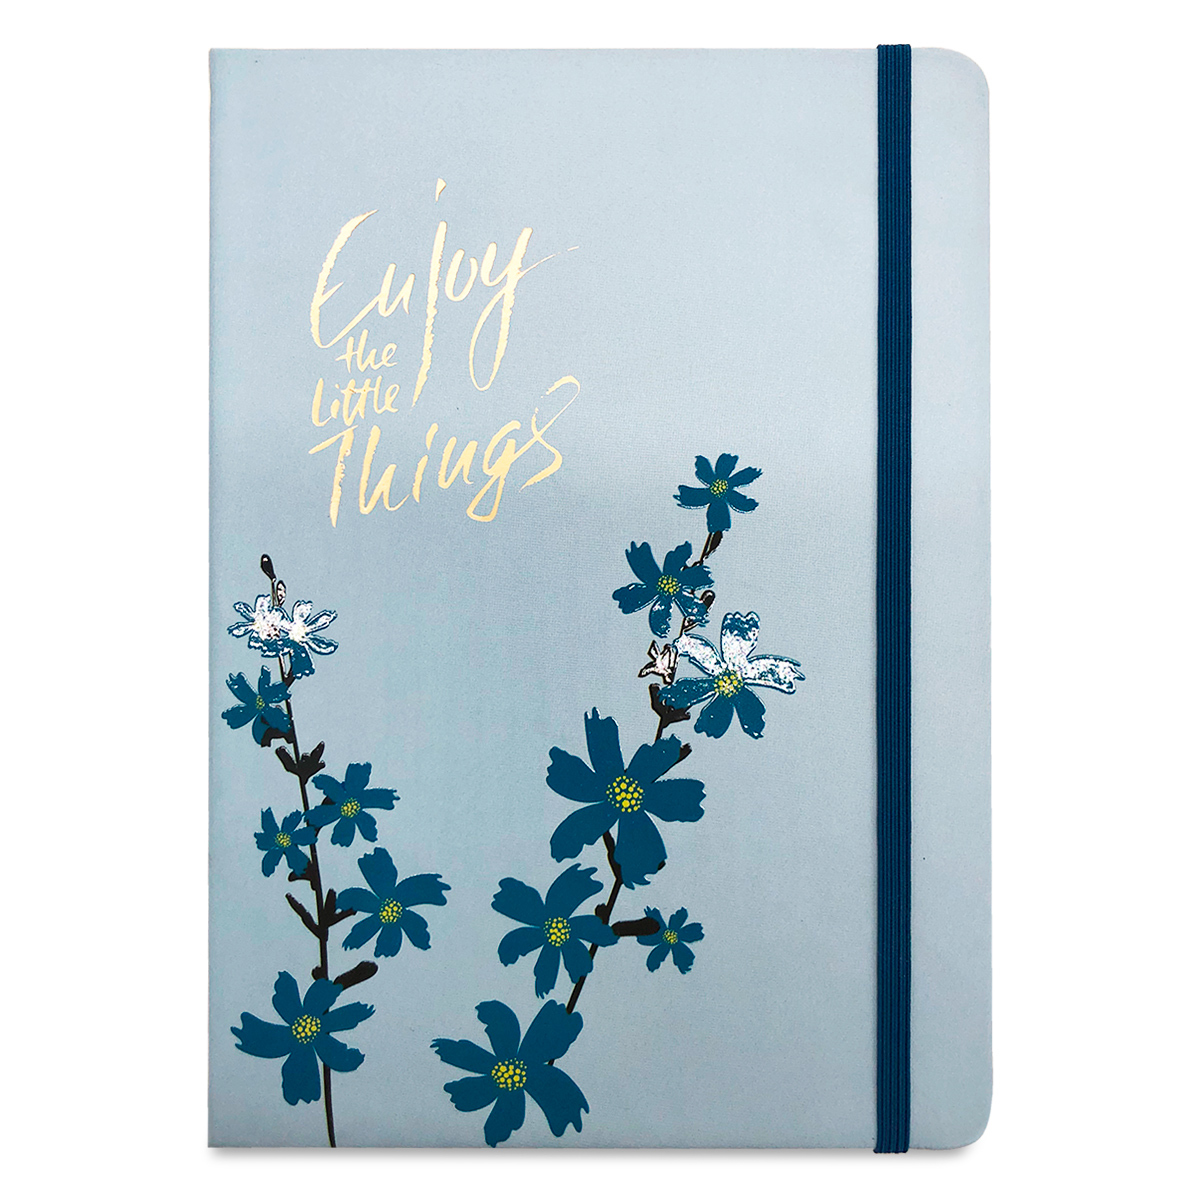 Cuaderno Forma Francesa Red Top Enjoy The Little Things Raya 80 hojas  Cosido | Office Depot Mexico